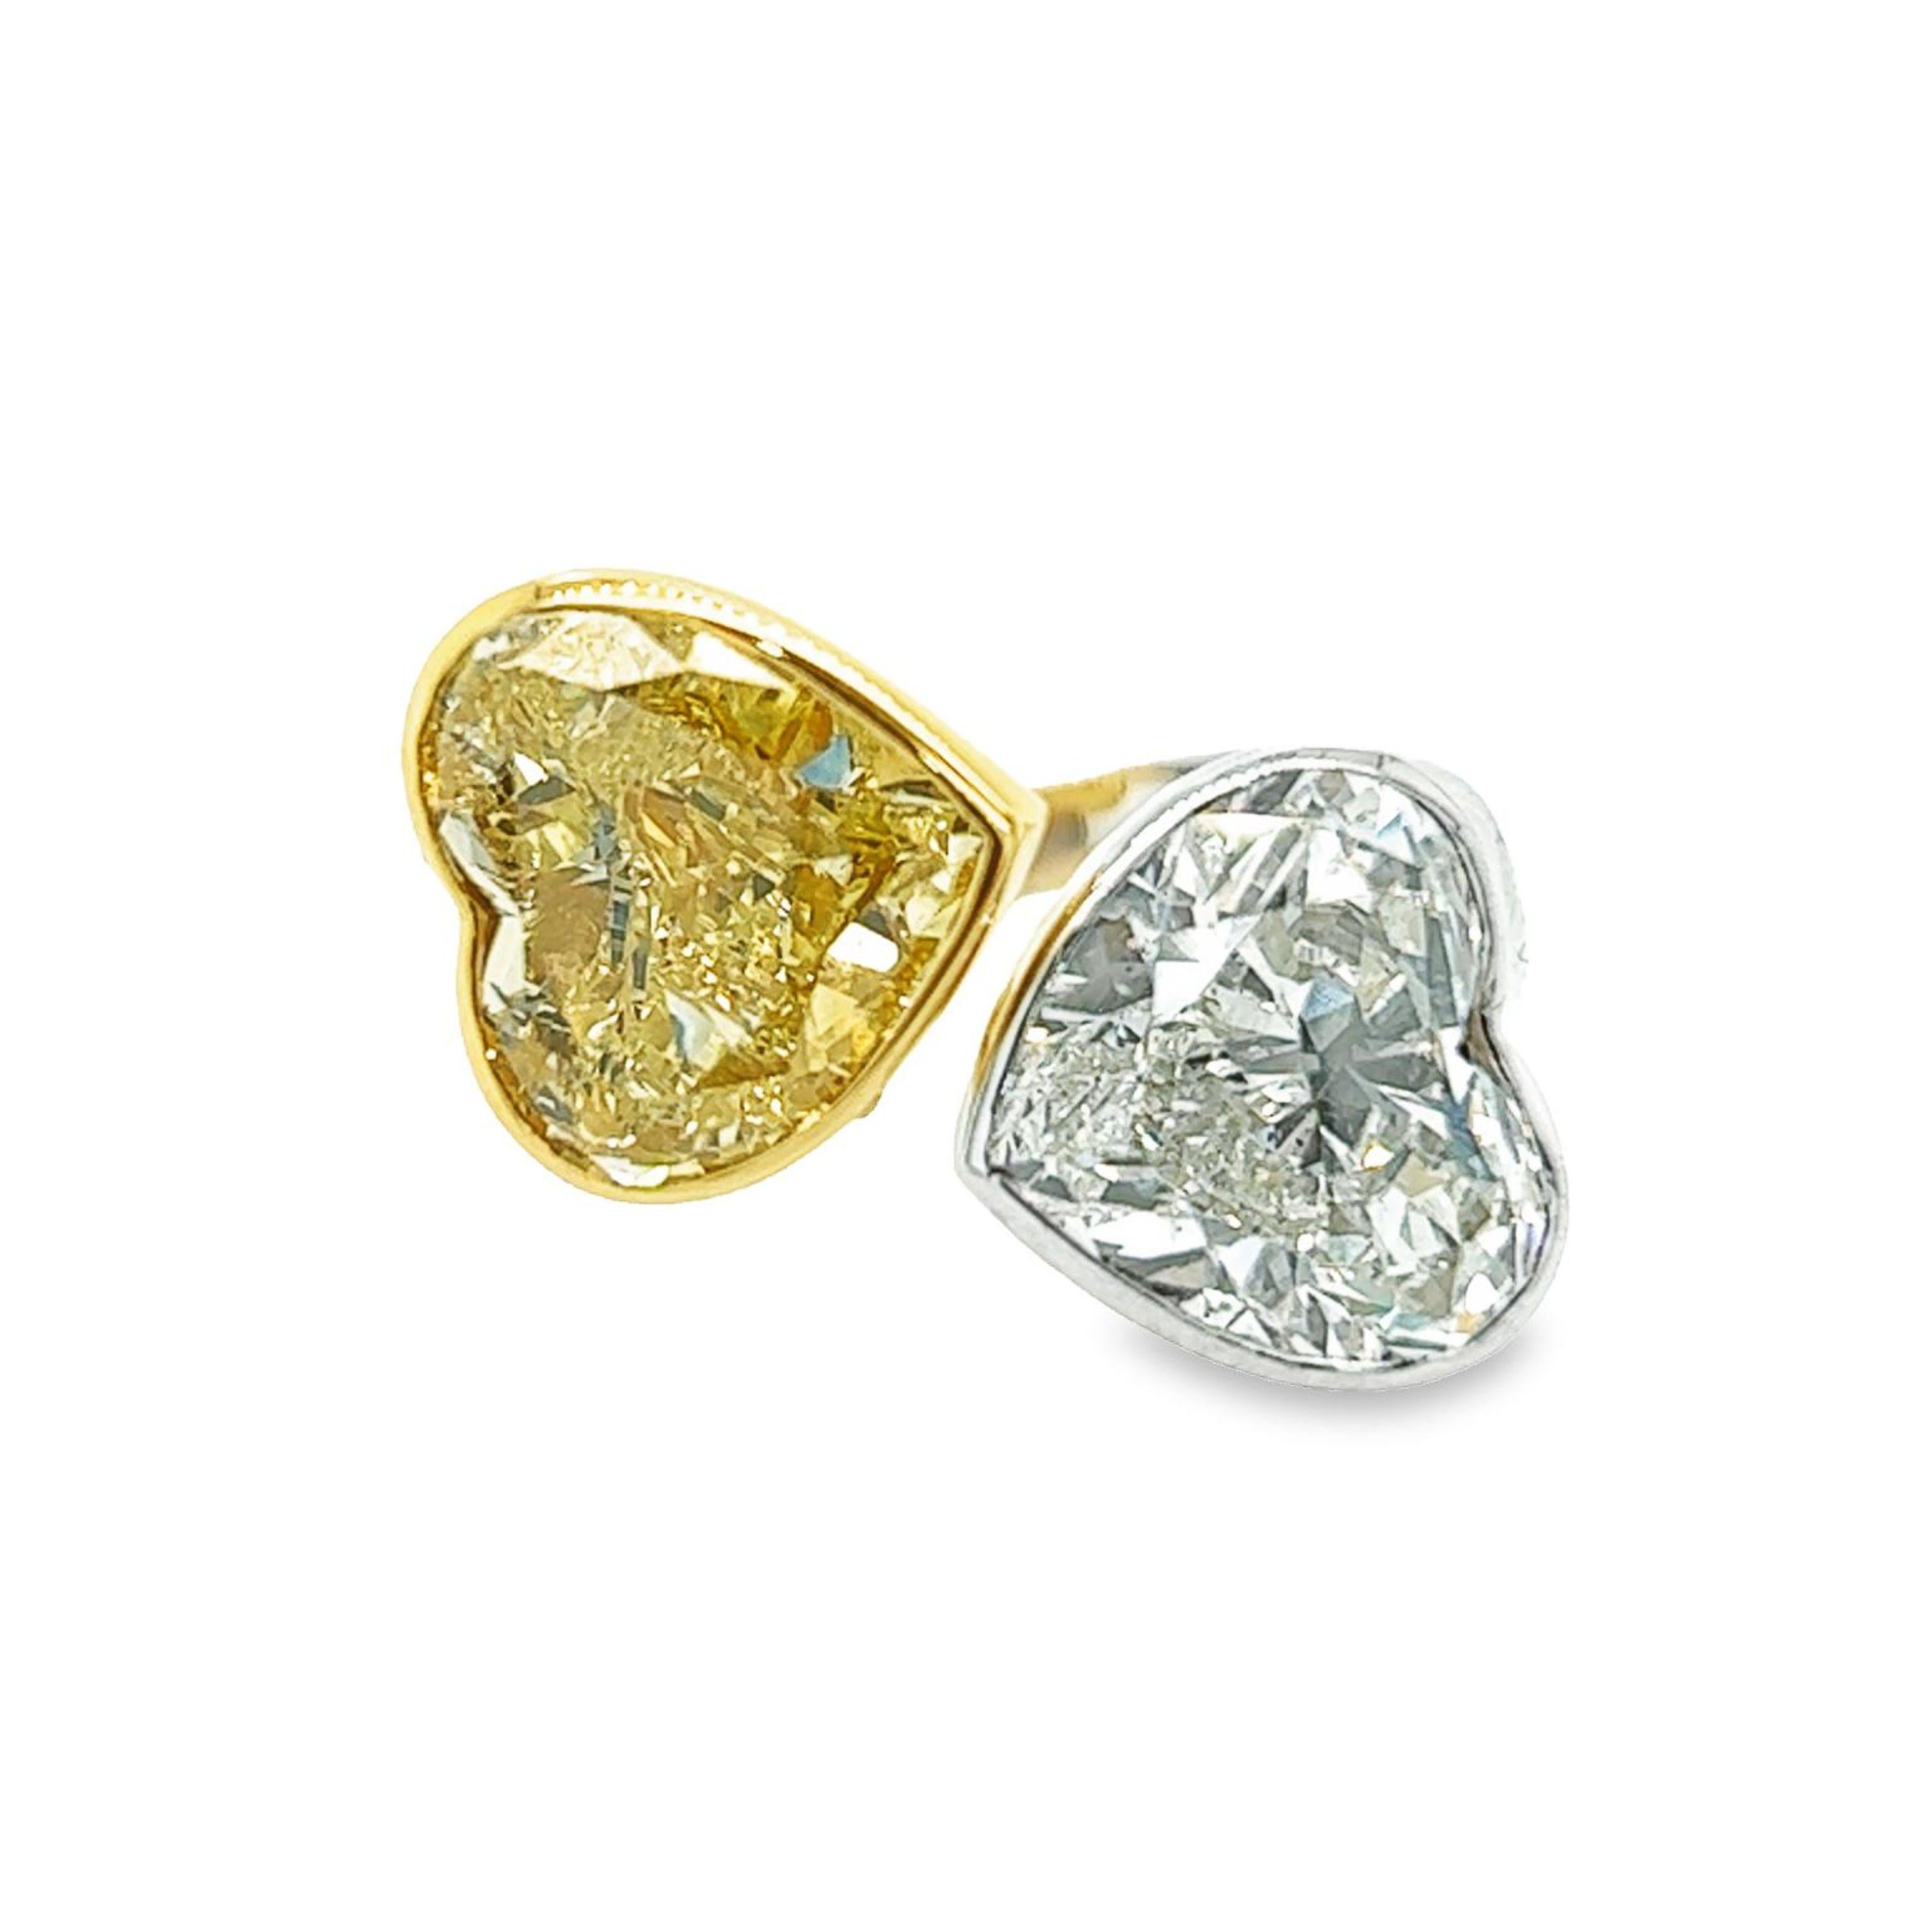 Rosenberg Diamonds & Co. 11.11 carat total weight Heart shape 5.19 carat Fancy Light Yellow SI1 clarity, 5.92 carat Heart shape J/SI2 clarity are both accompanied by a GIA certificate. This gorgeous unique by pass ring is full of fire and is an